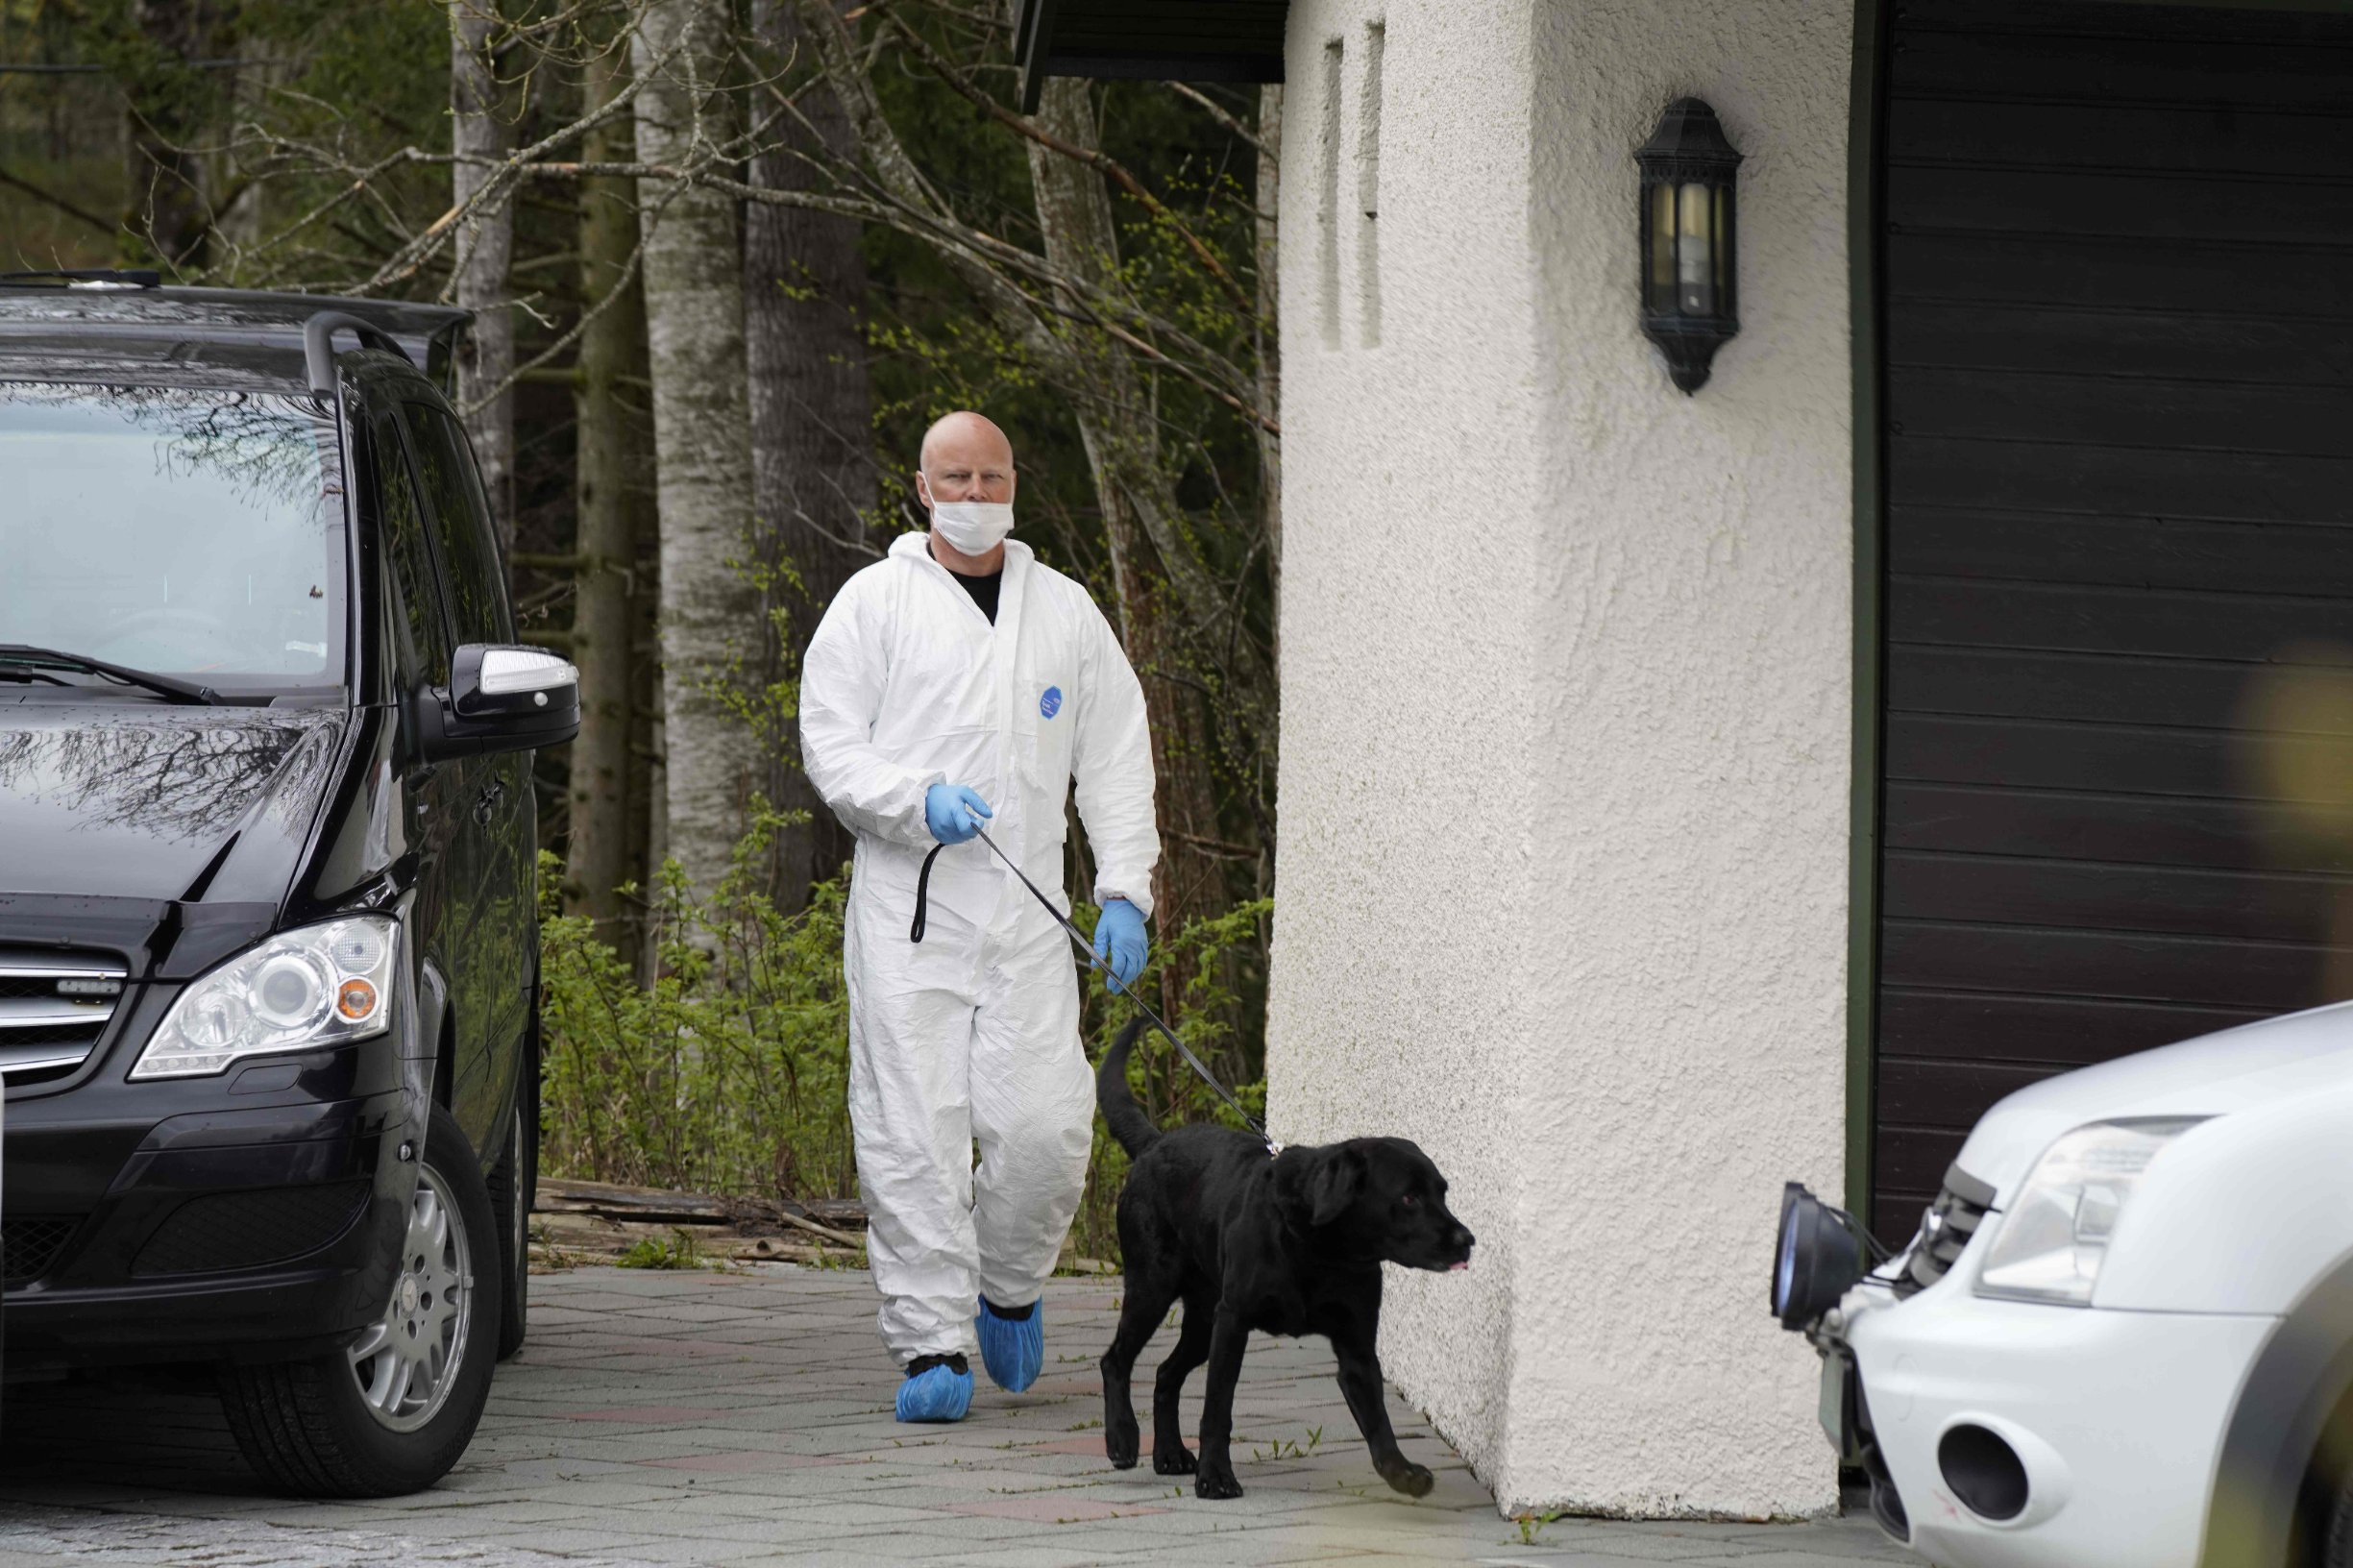 A Policeman with a dog searches the residence of the Hagen couple in Lorenskog near Oslo, Norway after Anne-Elisabeth Hagen's husband, Tom Hagen, was arrested in a police action in Lorenskog on April 28, 2020. - Norwegian police said on April 28, 2020 they had arrested wealthy businessman Tom Hagen over the disappearance of his wife 18 months ago, the latest twist in a case that has kept the Nordic countries on tenterhooks. Tom Hagen, 70, was arrested as he was leaving his home for work, on suspicion of 